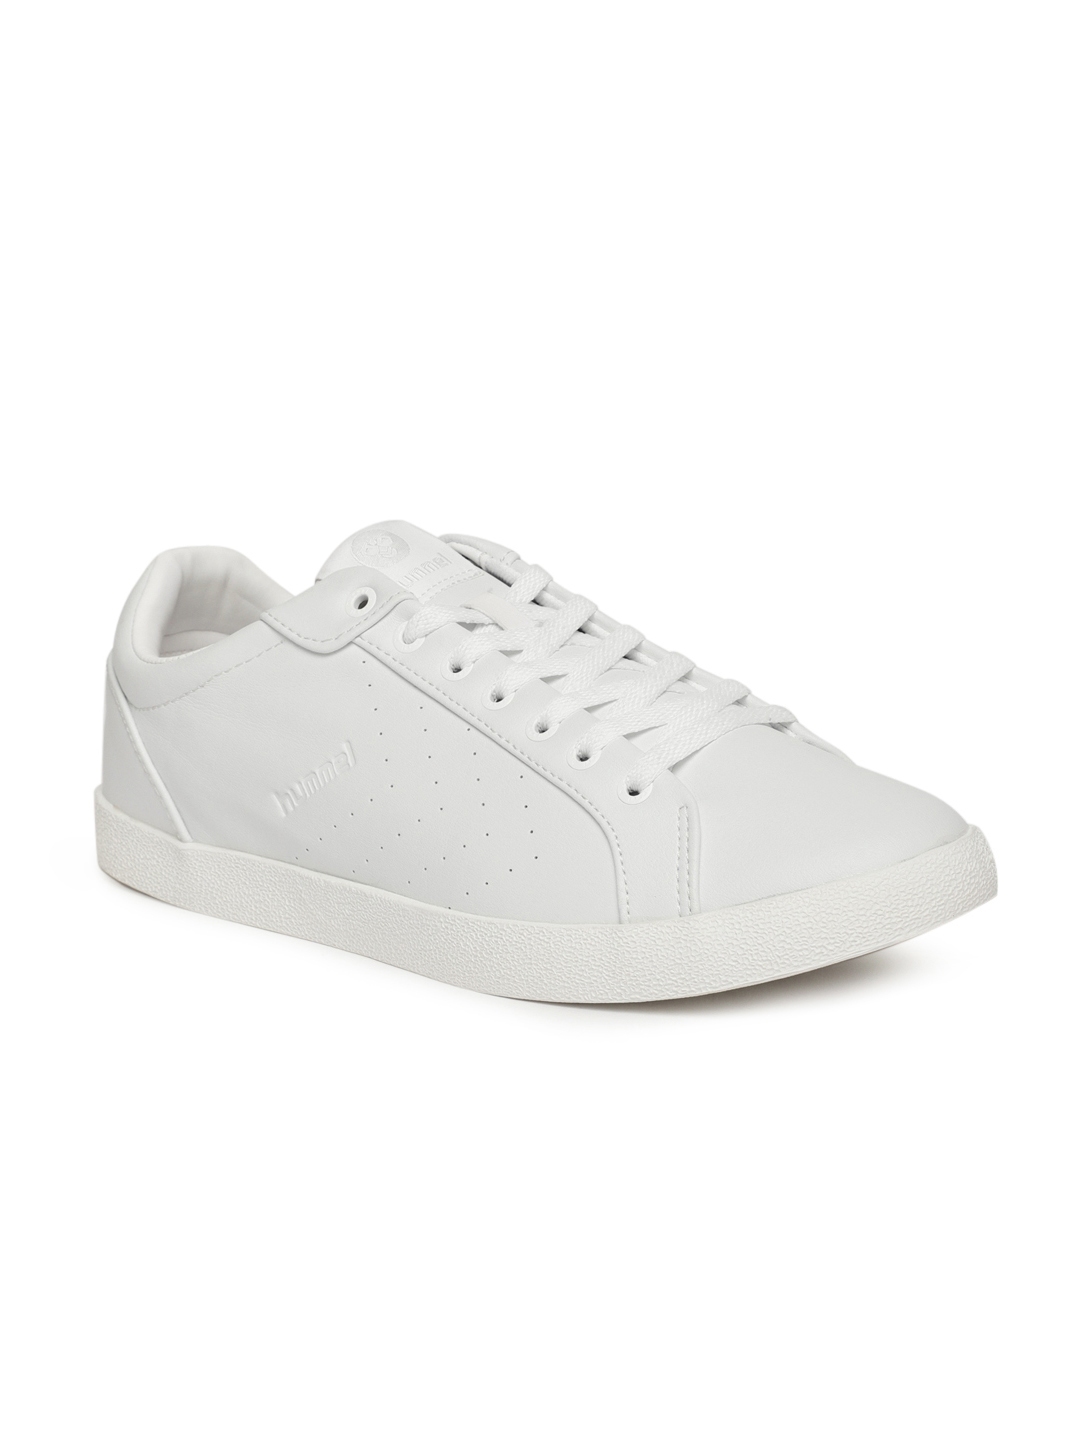 Buy Hummel Unisex White Solid COURT TONAL Sneakers - Casual for Unisex 7188613 | Myntra